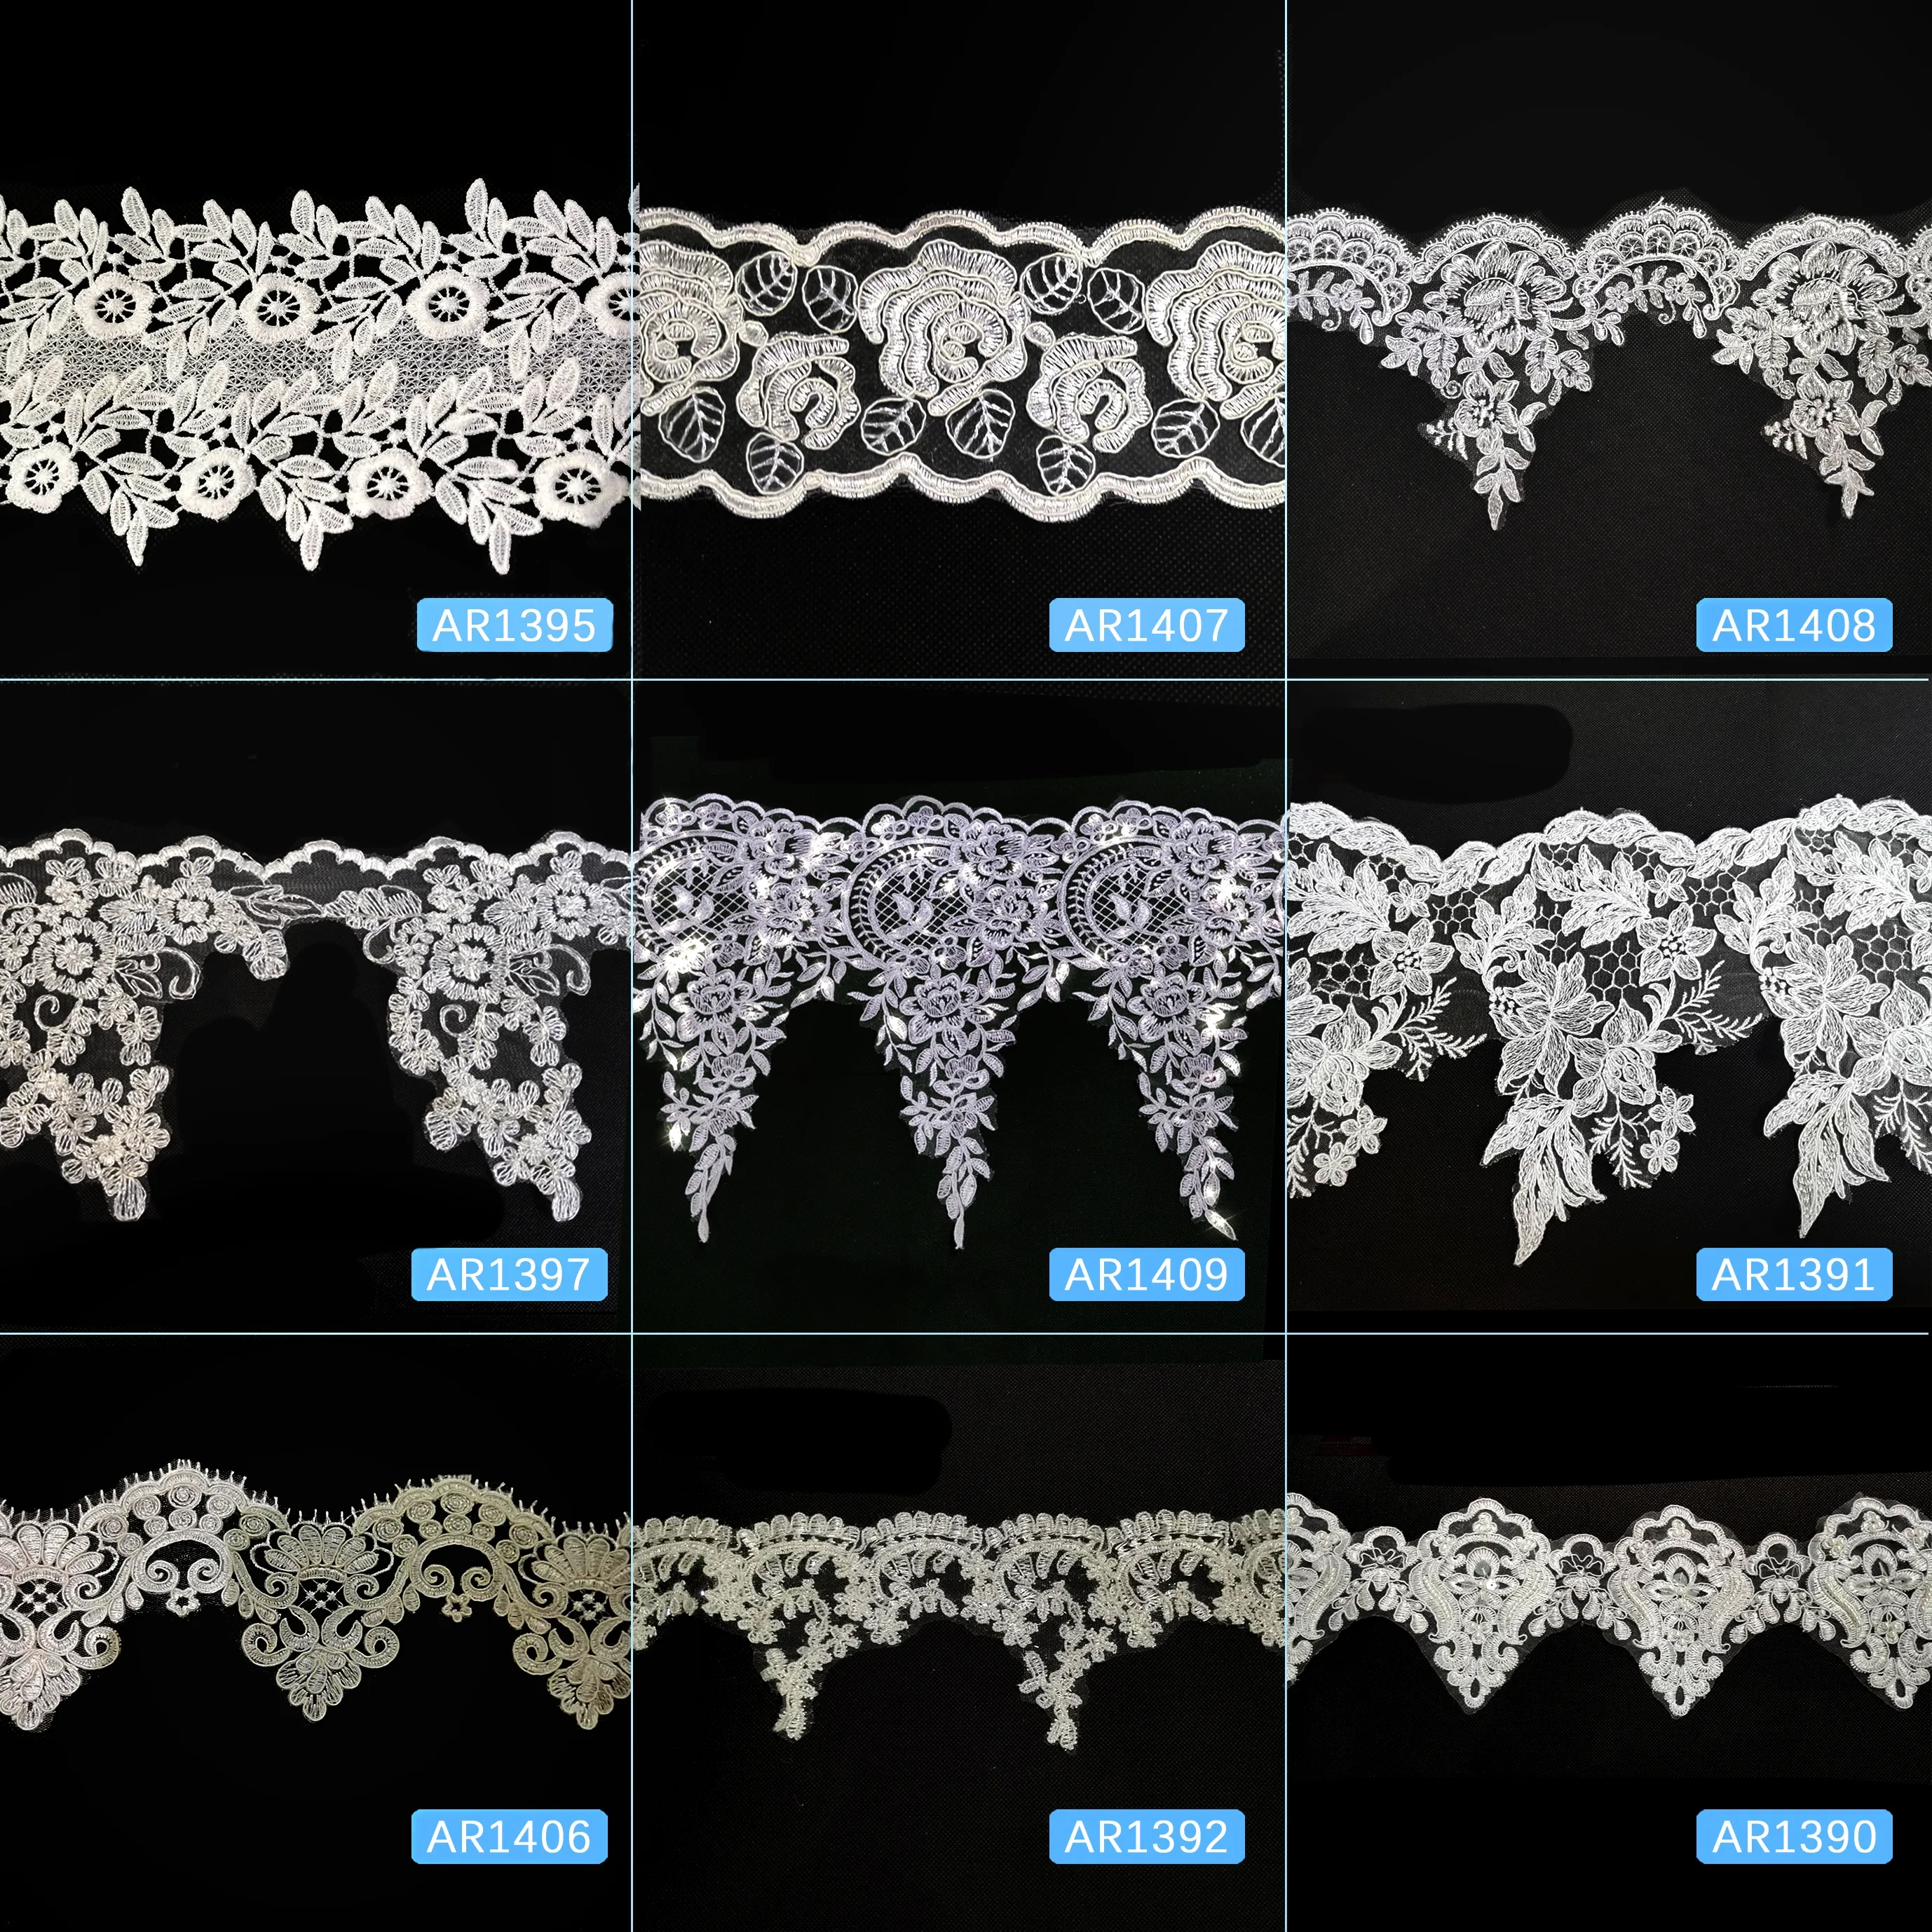 Shantou Lace Manufacturer chemical cording trim Embroidered lace fabric with sequins